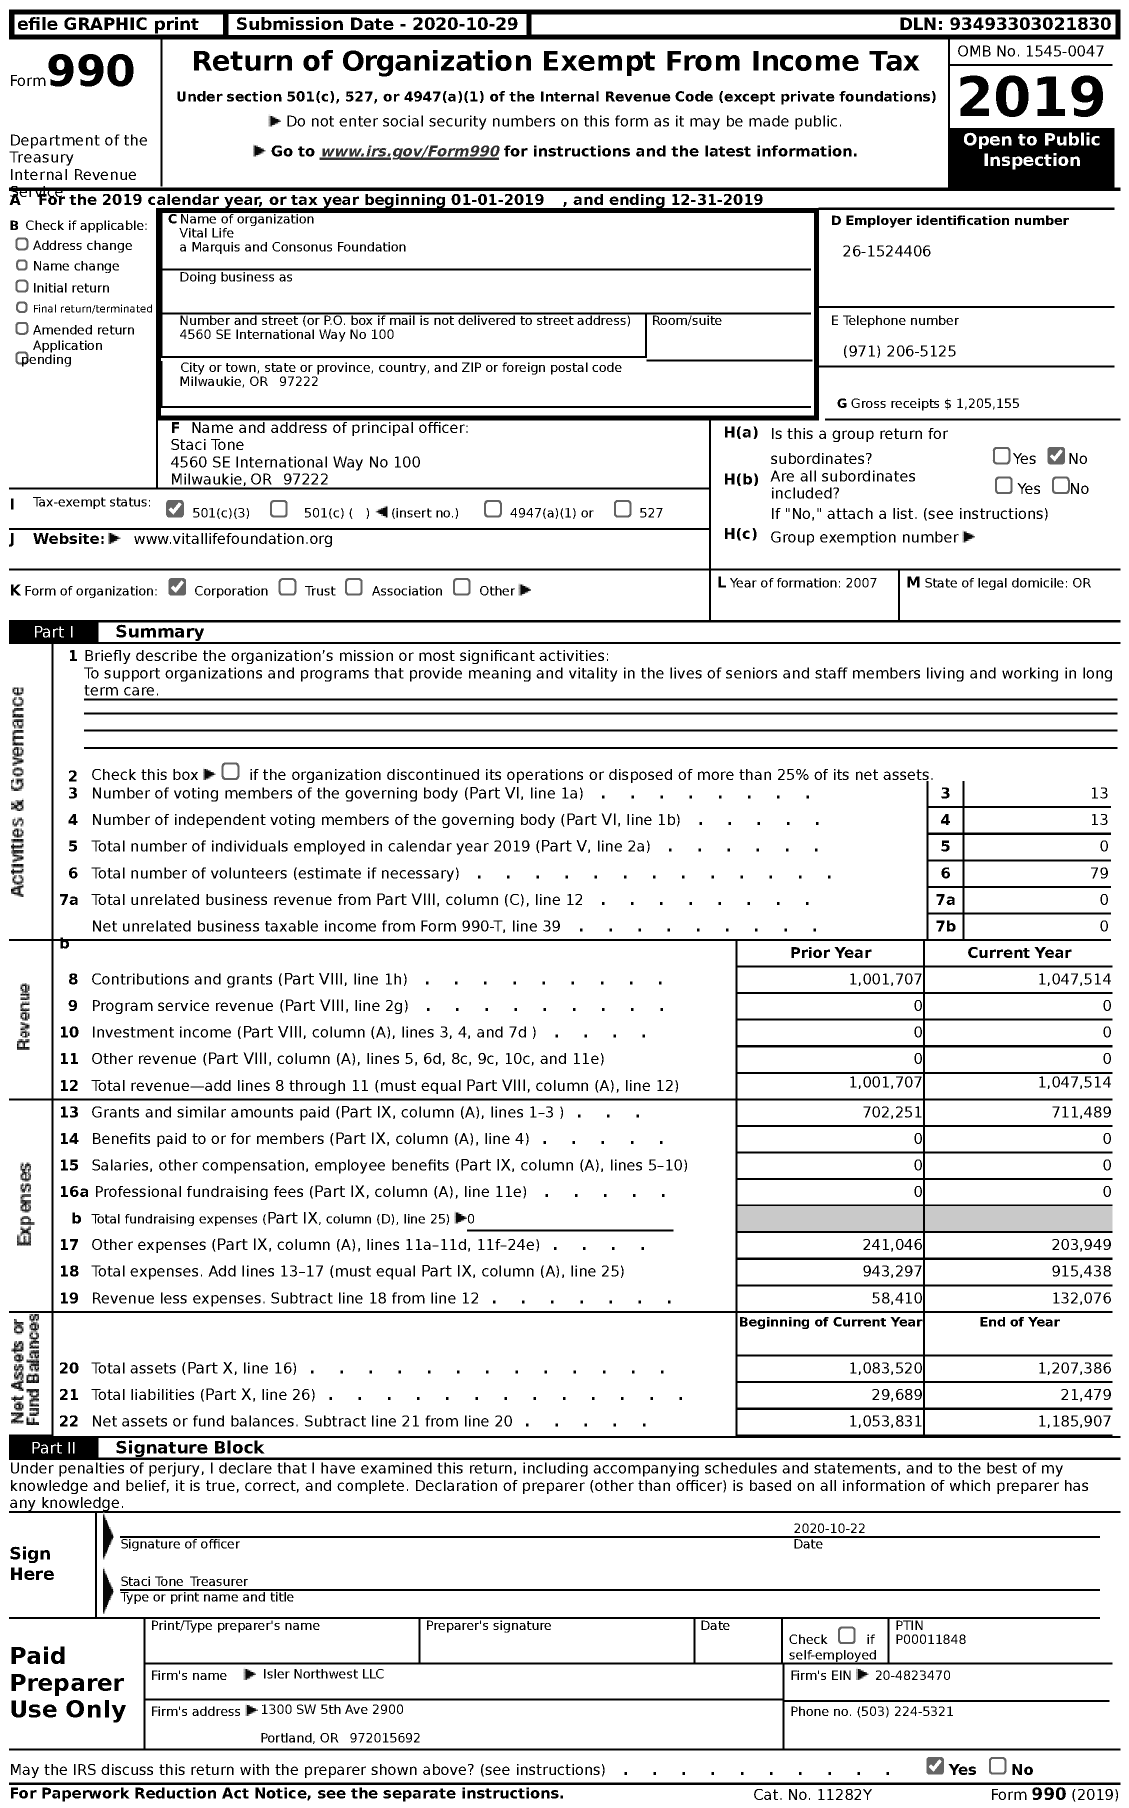 Image of first page of 2019 Form 990 for Vital Life a Marquis and Consonus Foundation